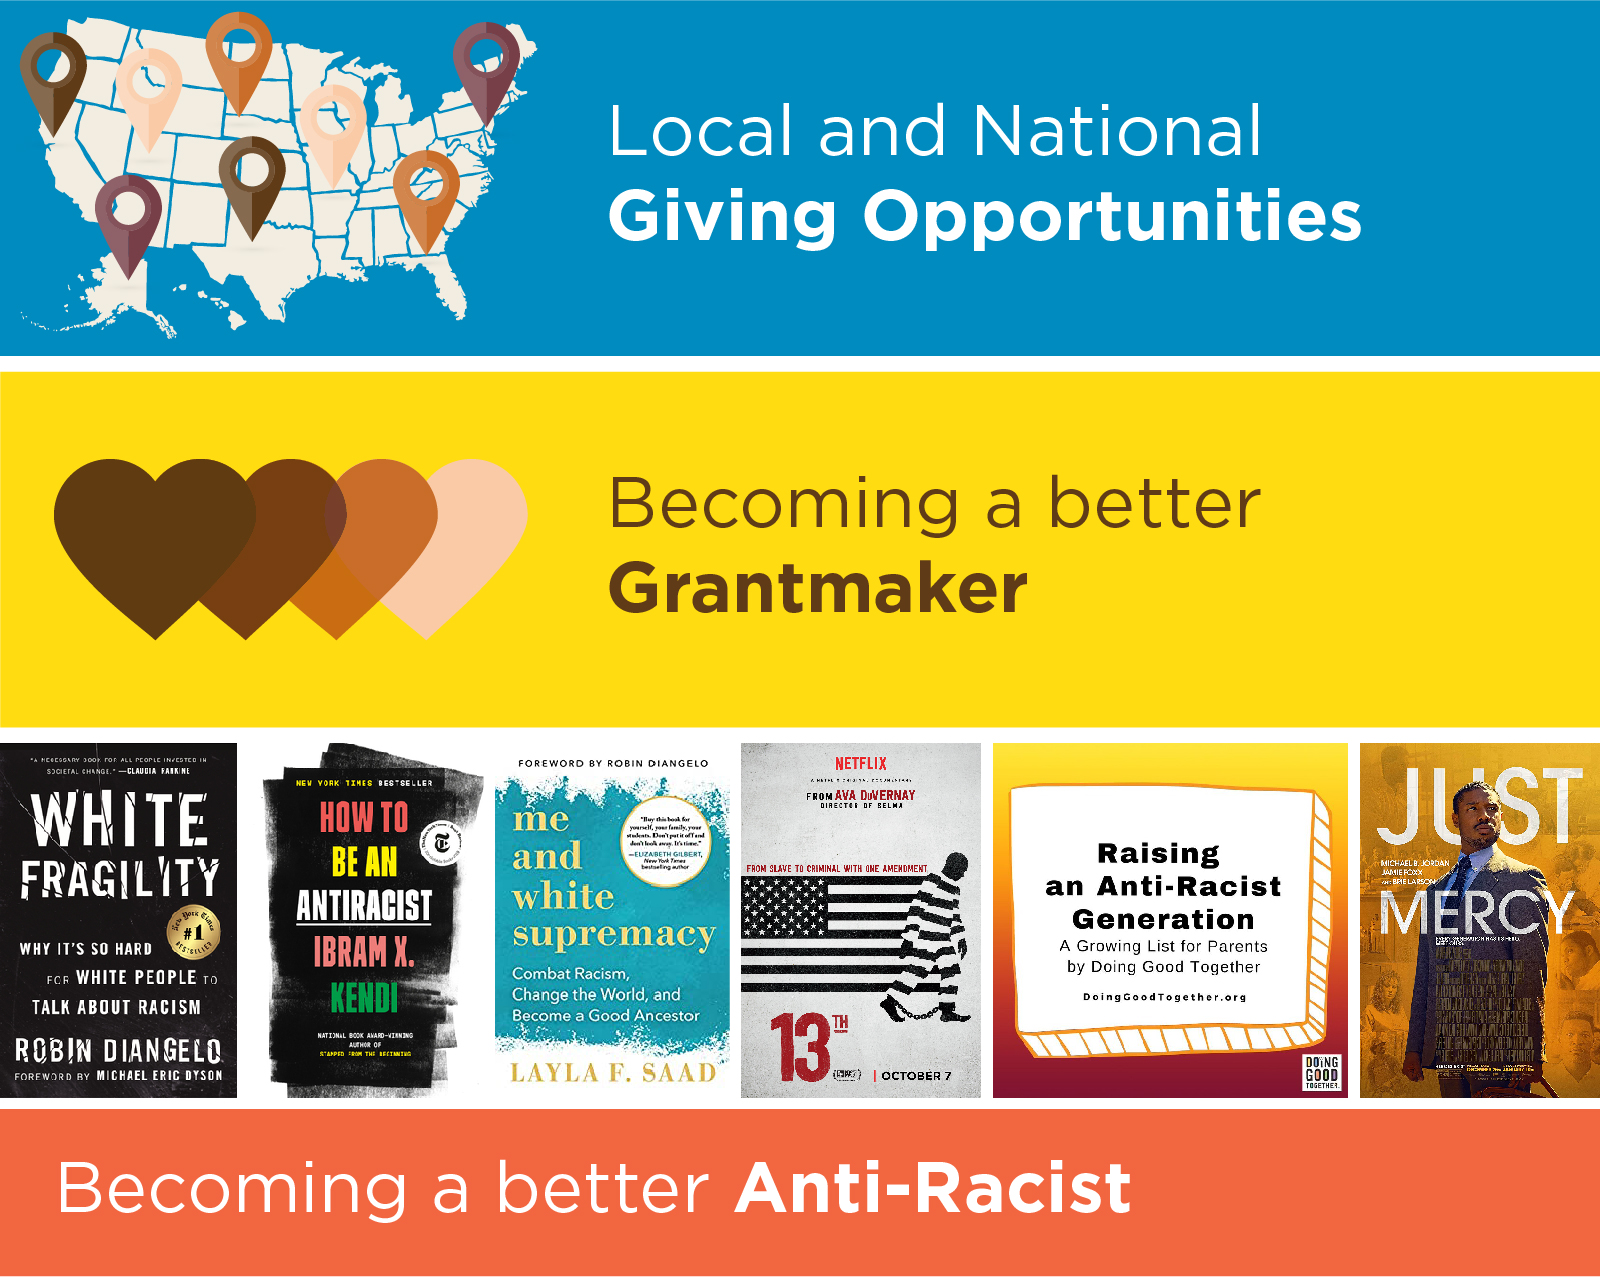 Racial Justice Grantmaking: Recommendations and Resources